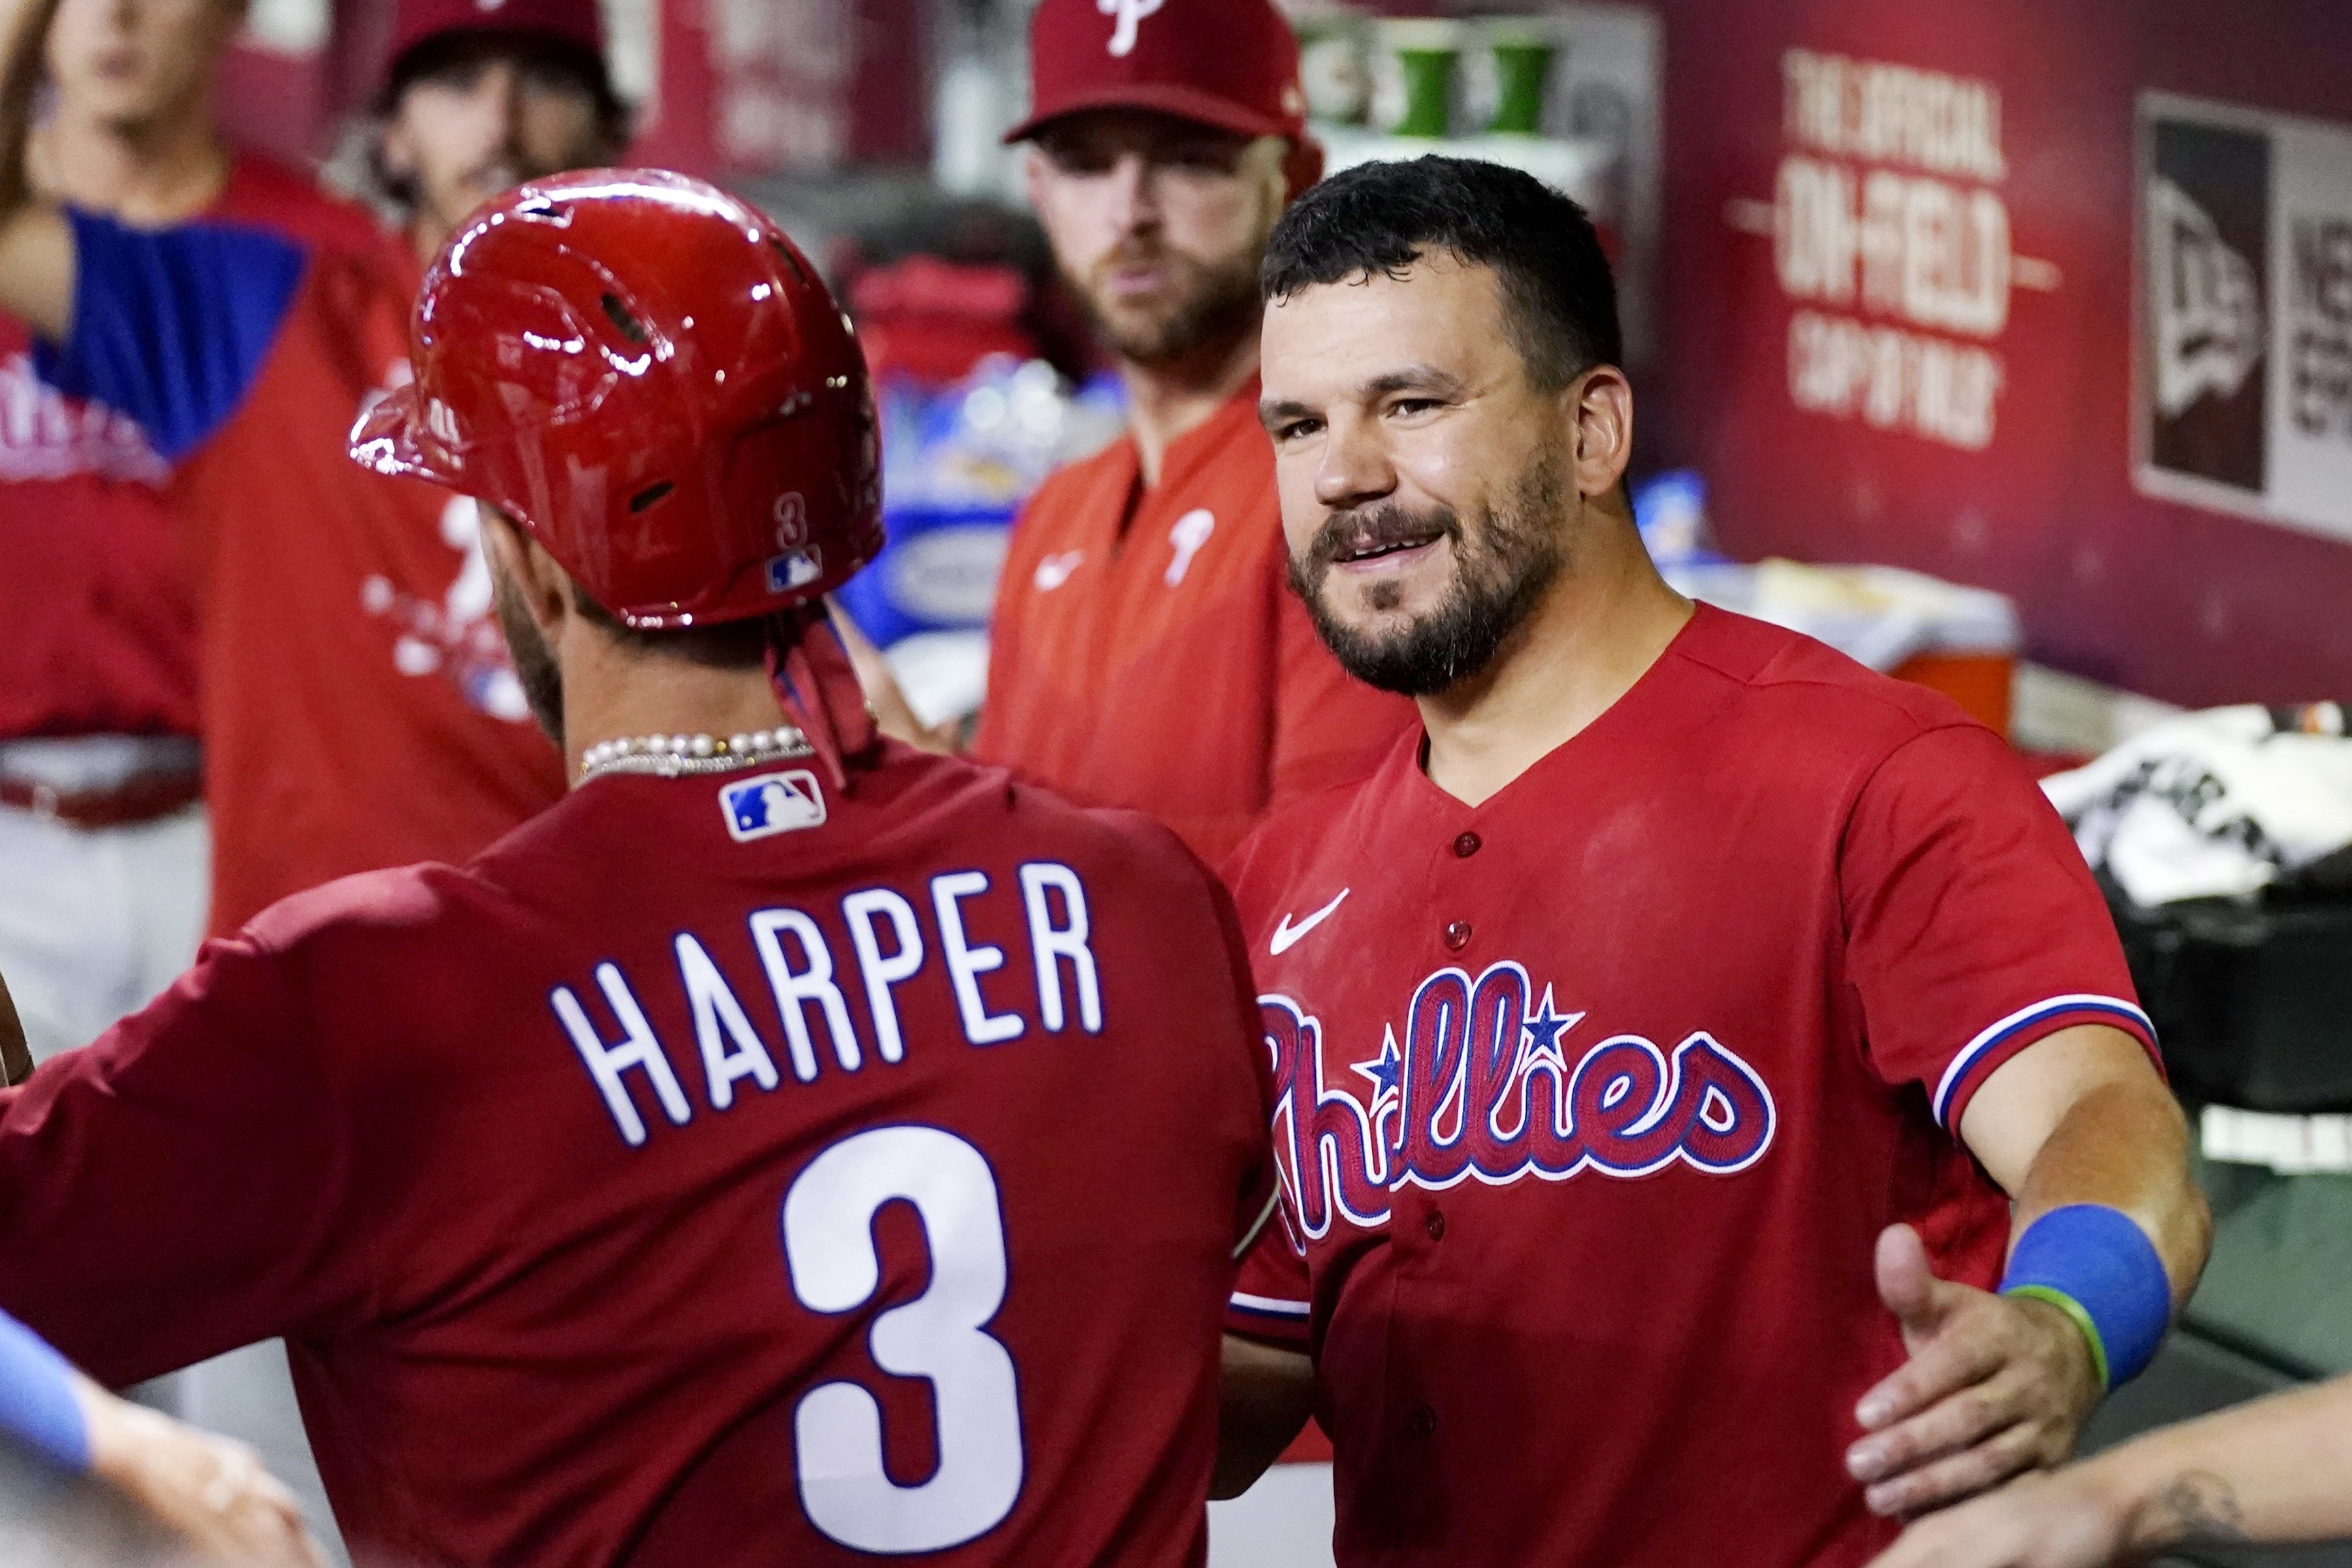 Phillies' September collapse puts wild card, playoff hopes in peril